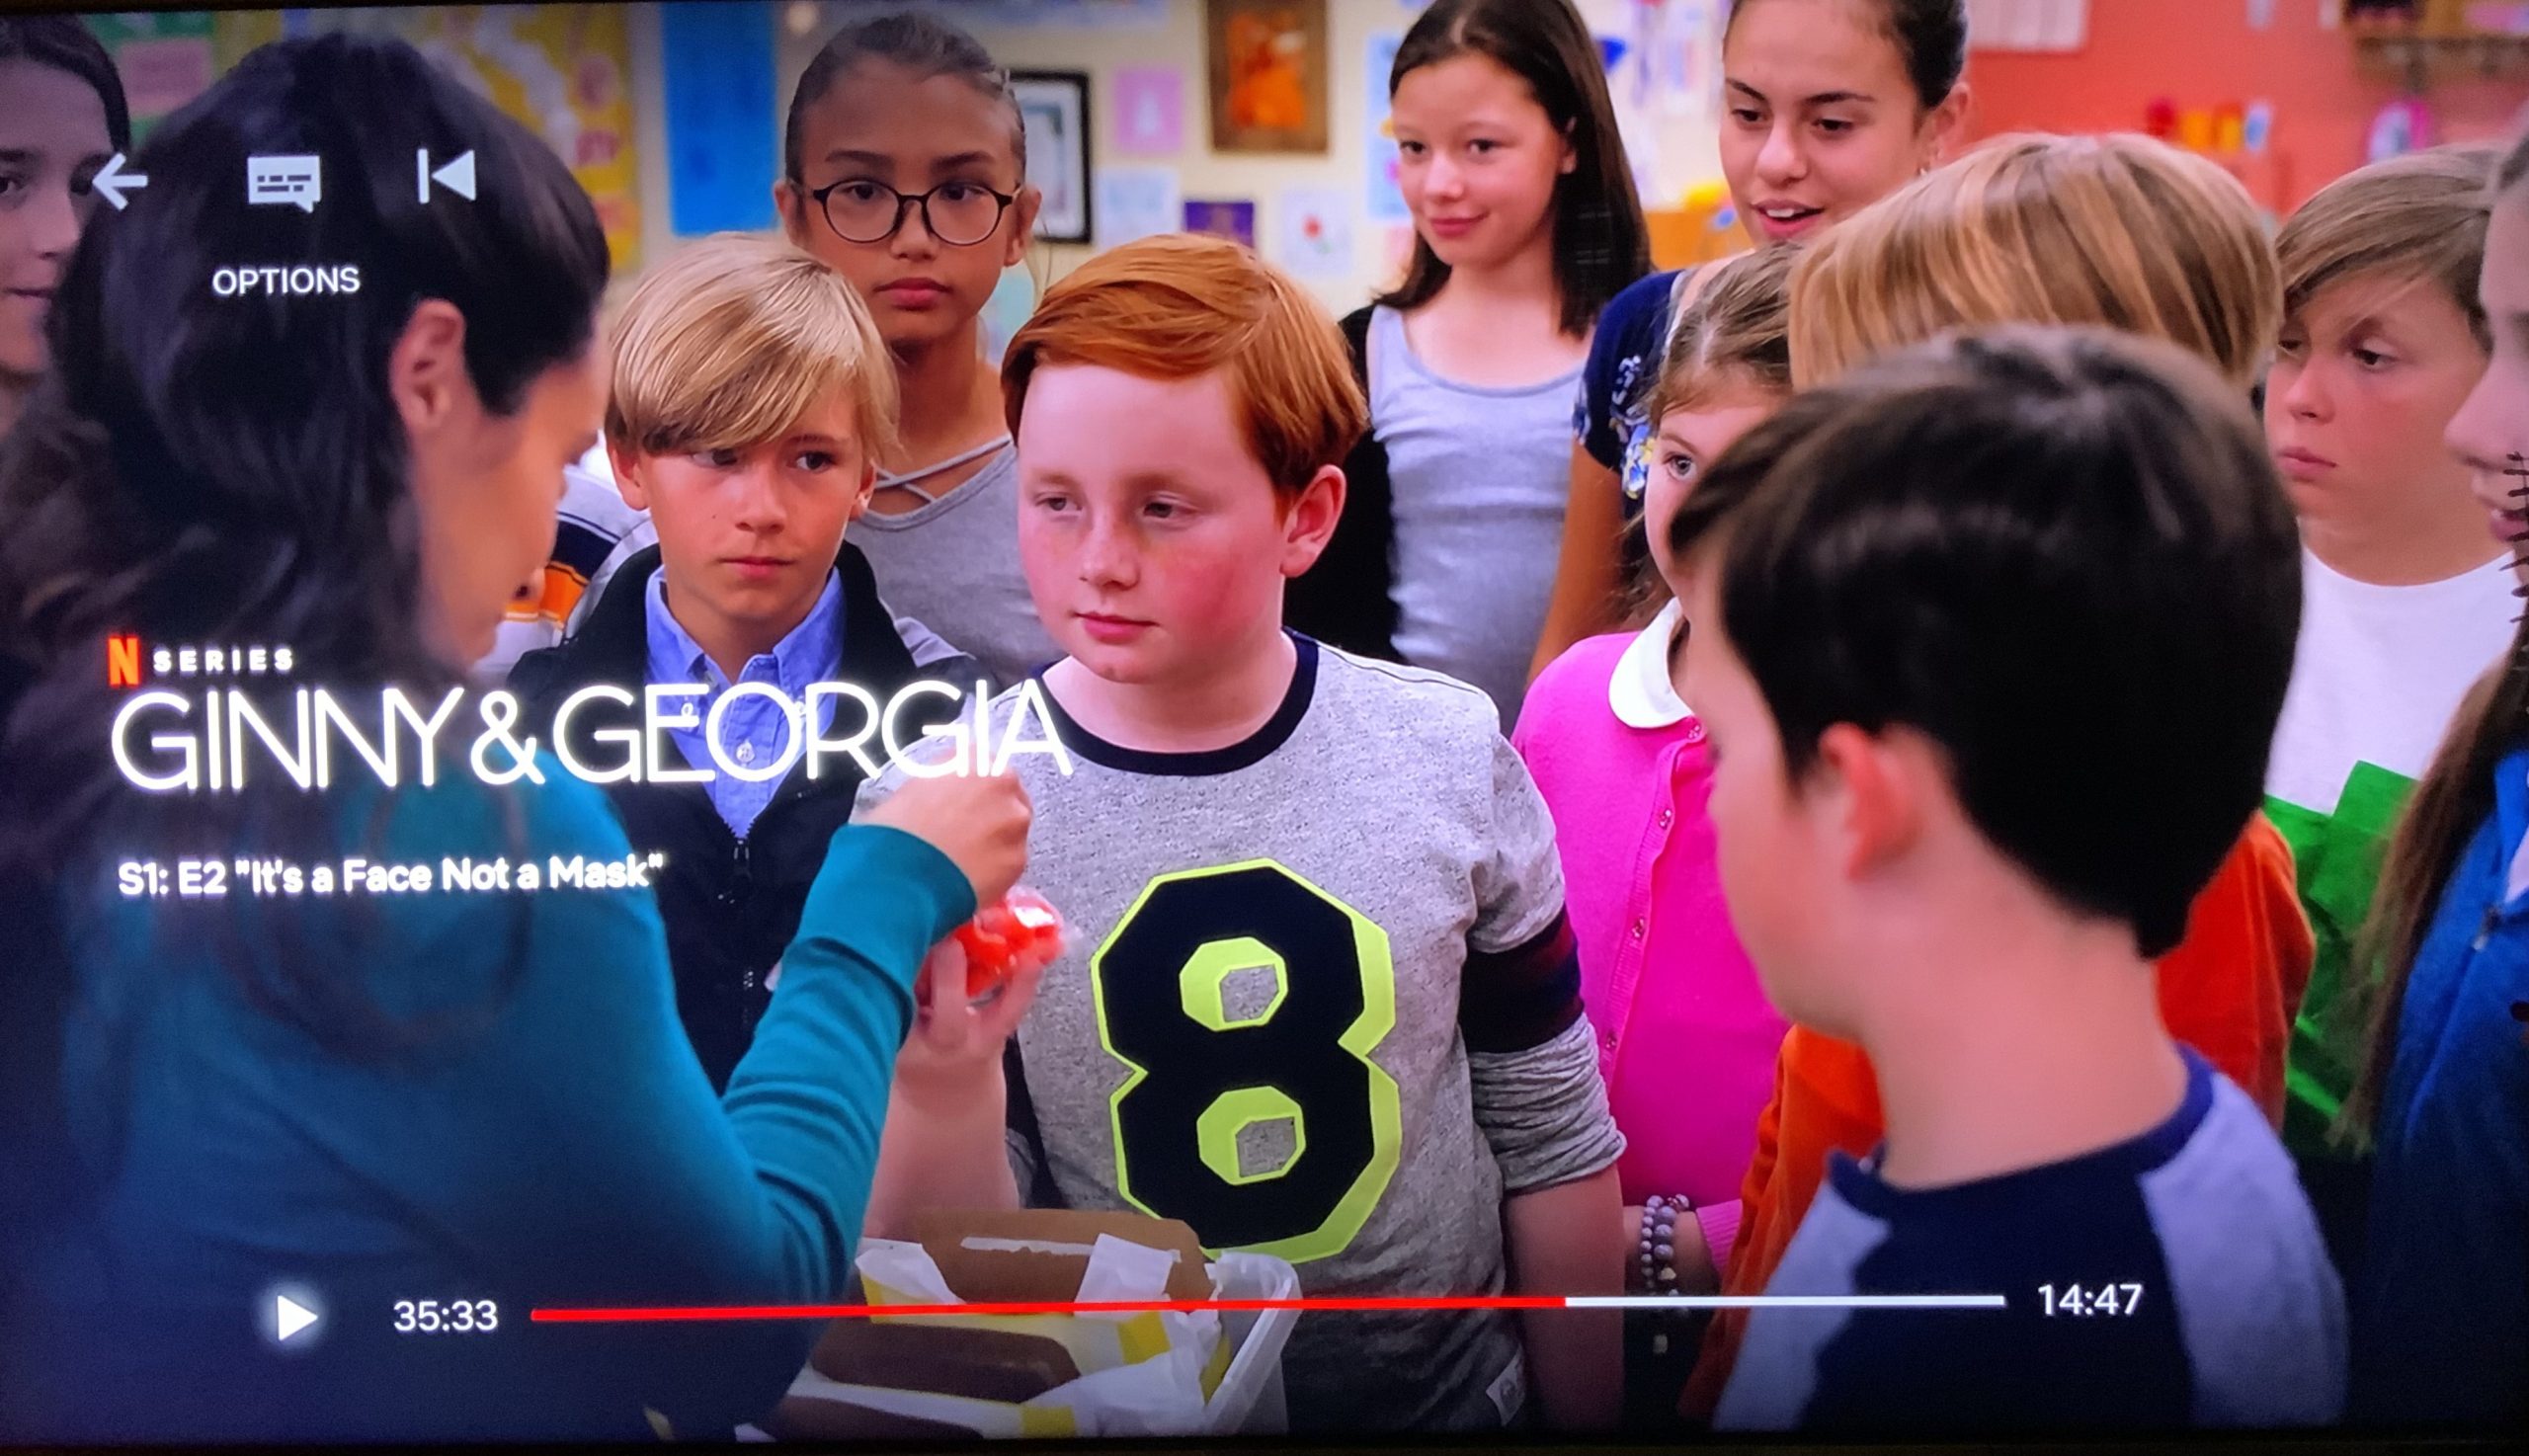 Netflix complaint Stop bullying red-haired people (and children)